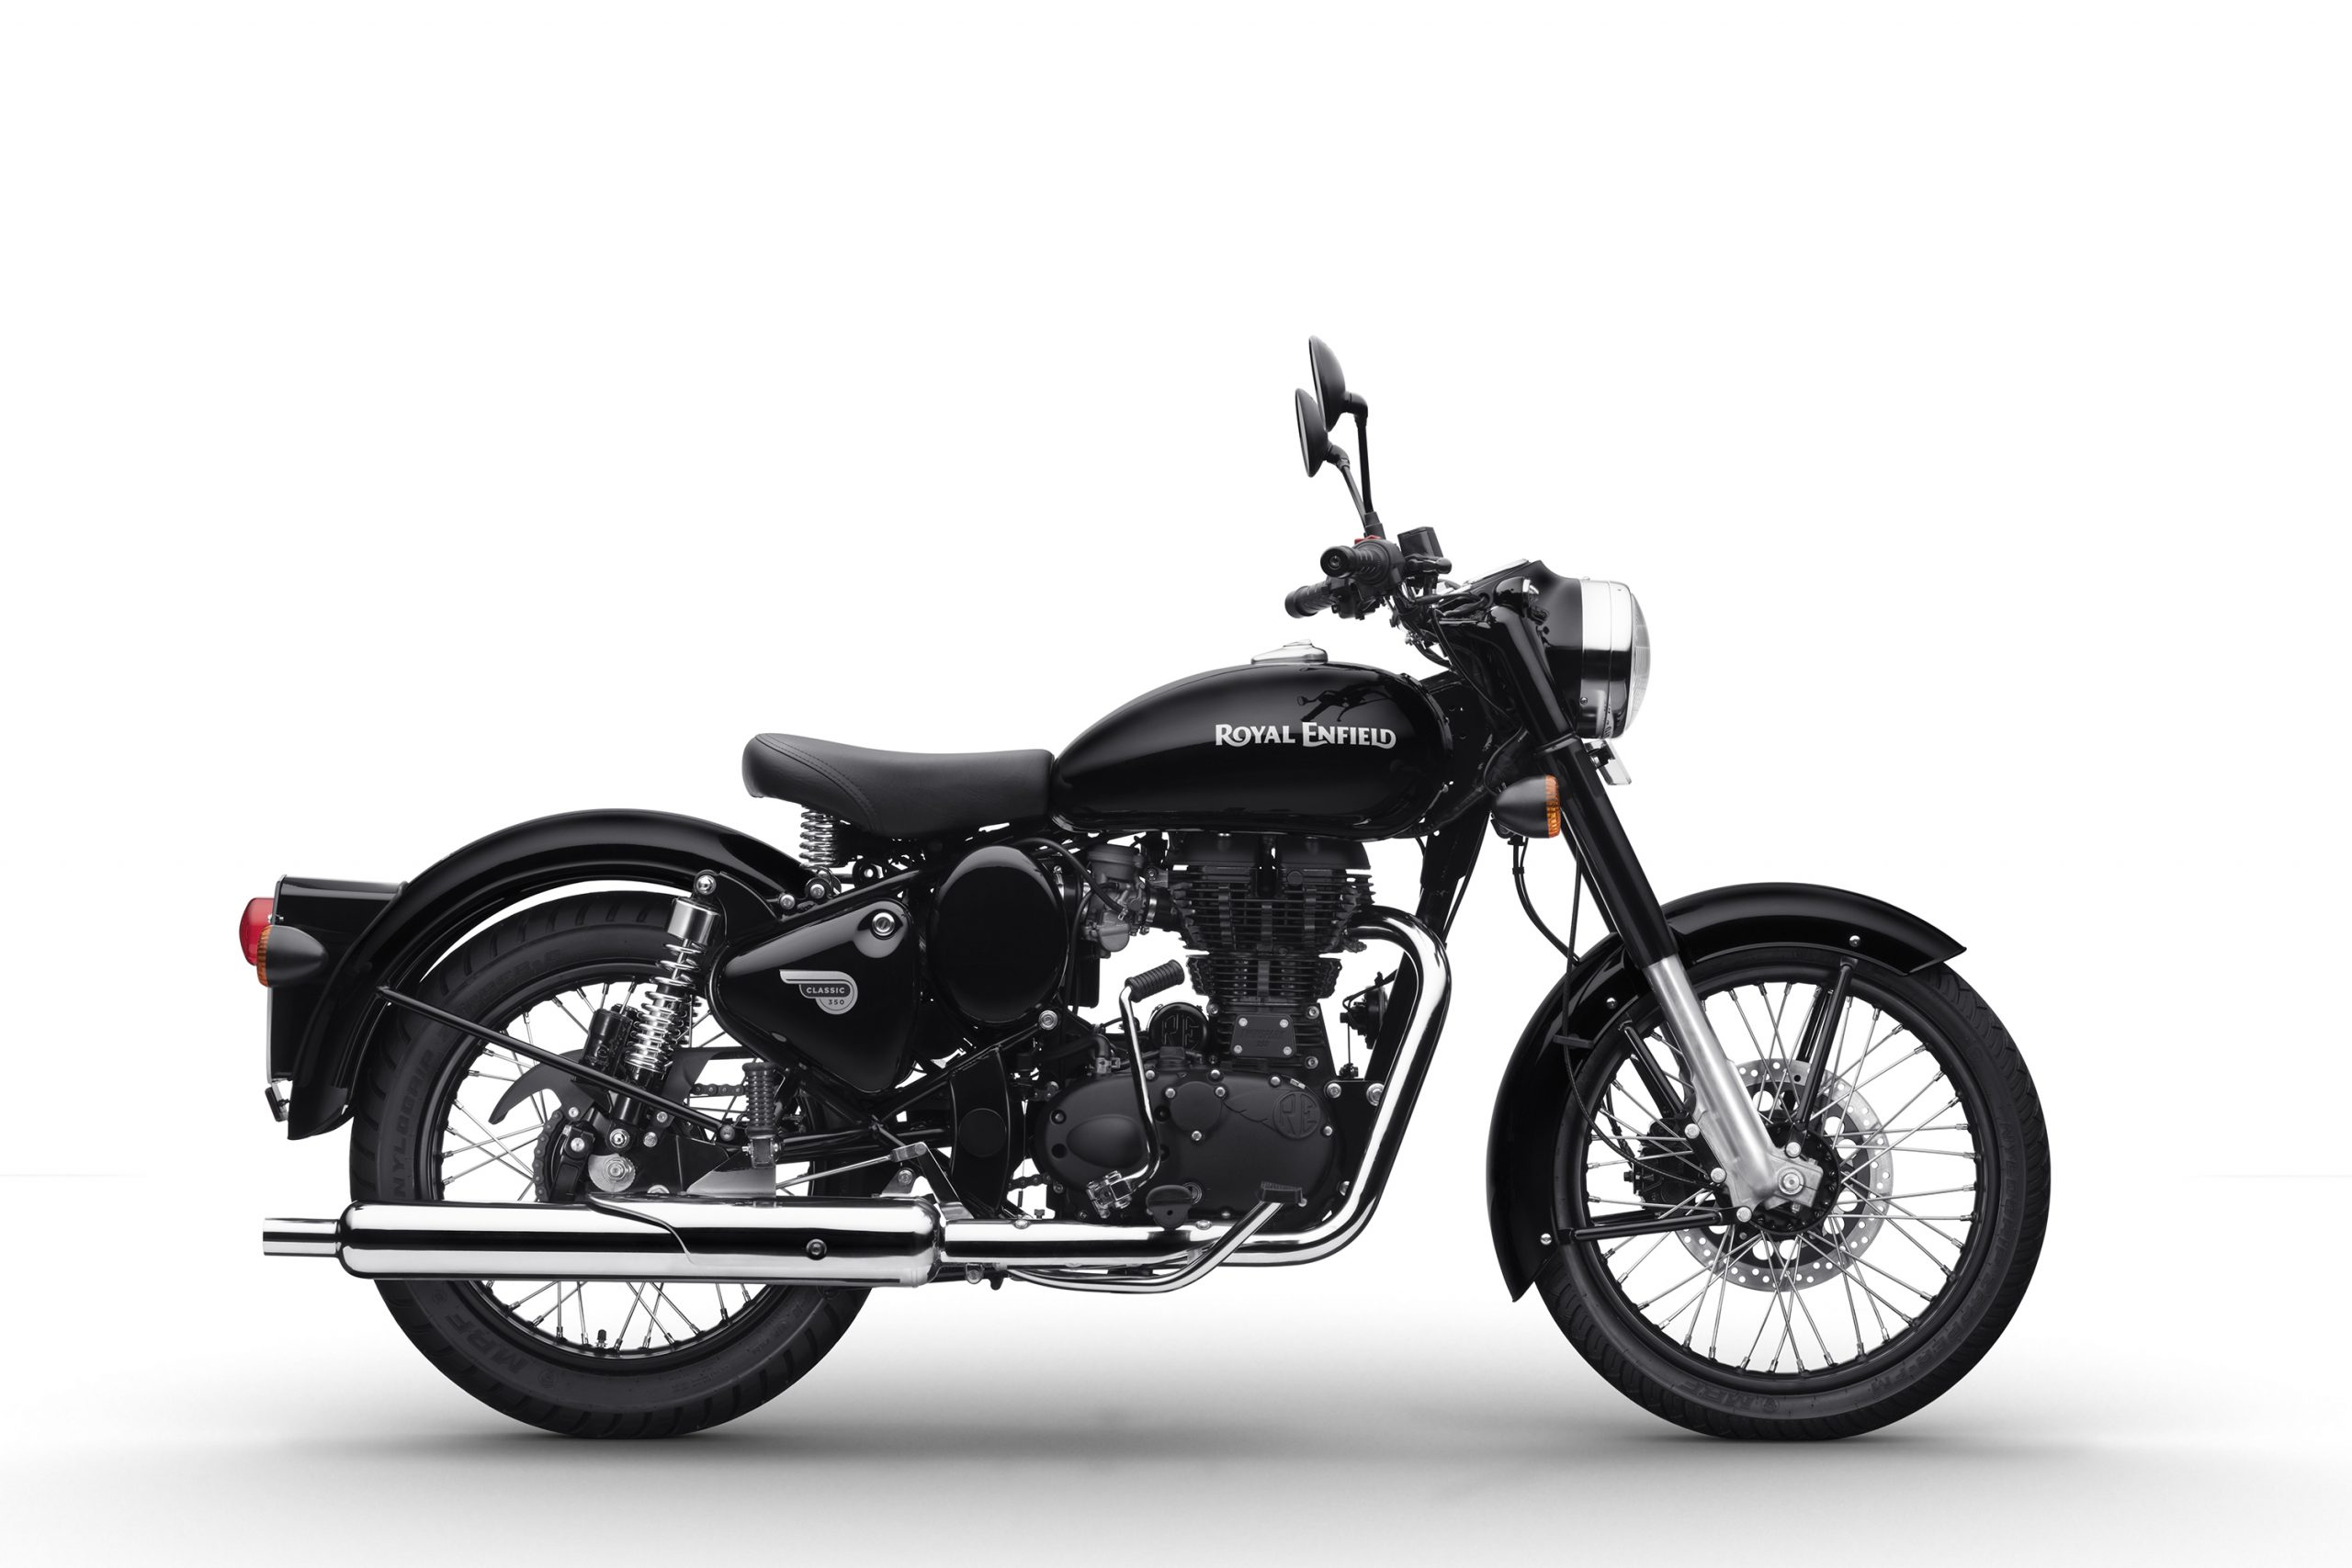 Royal Enfield Classic 350 Now Available With A Single Seat For Touring